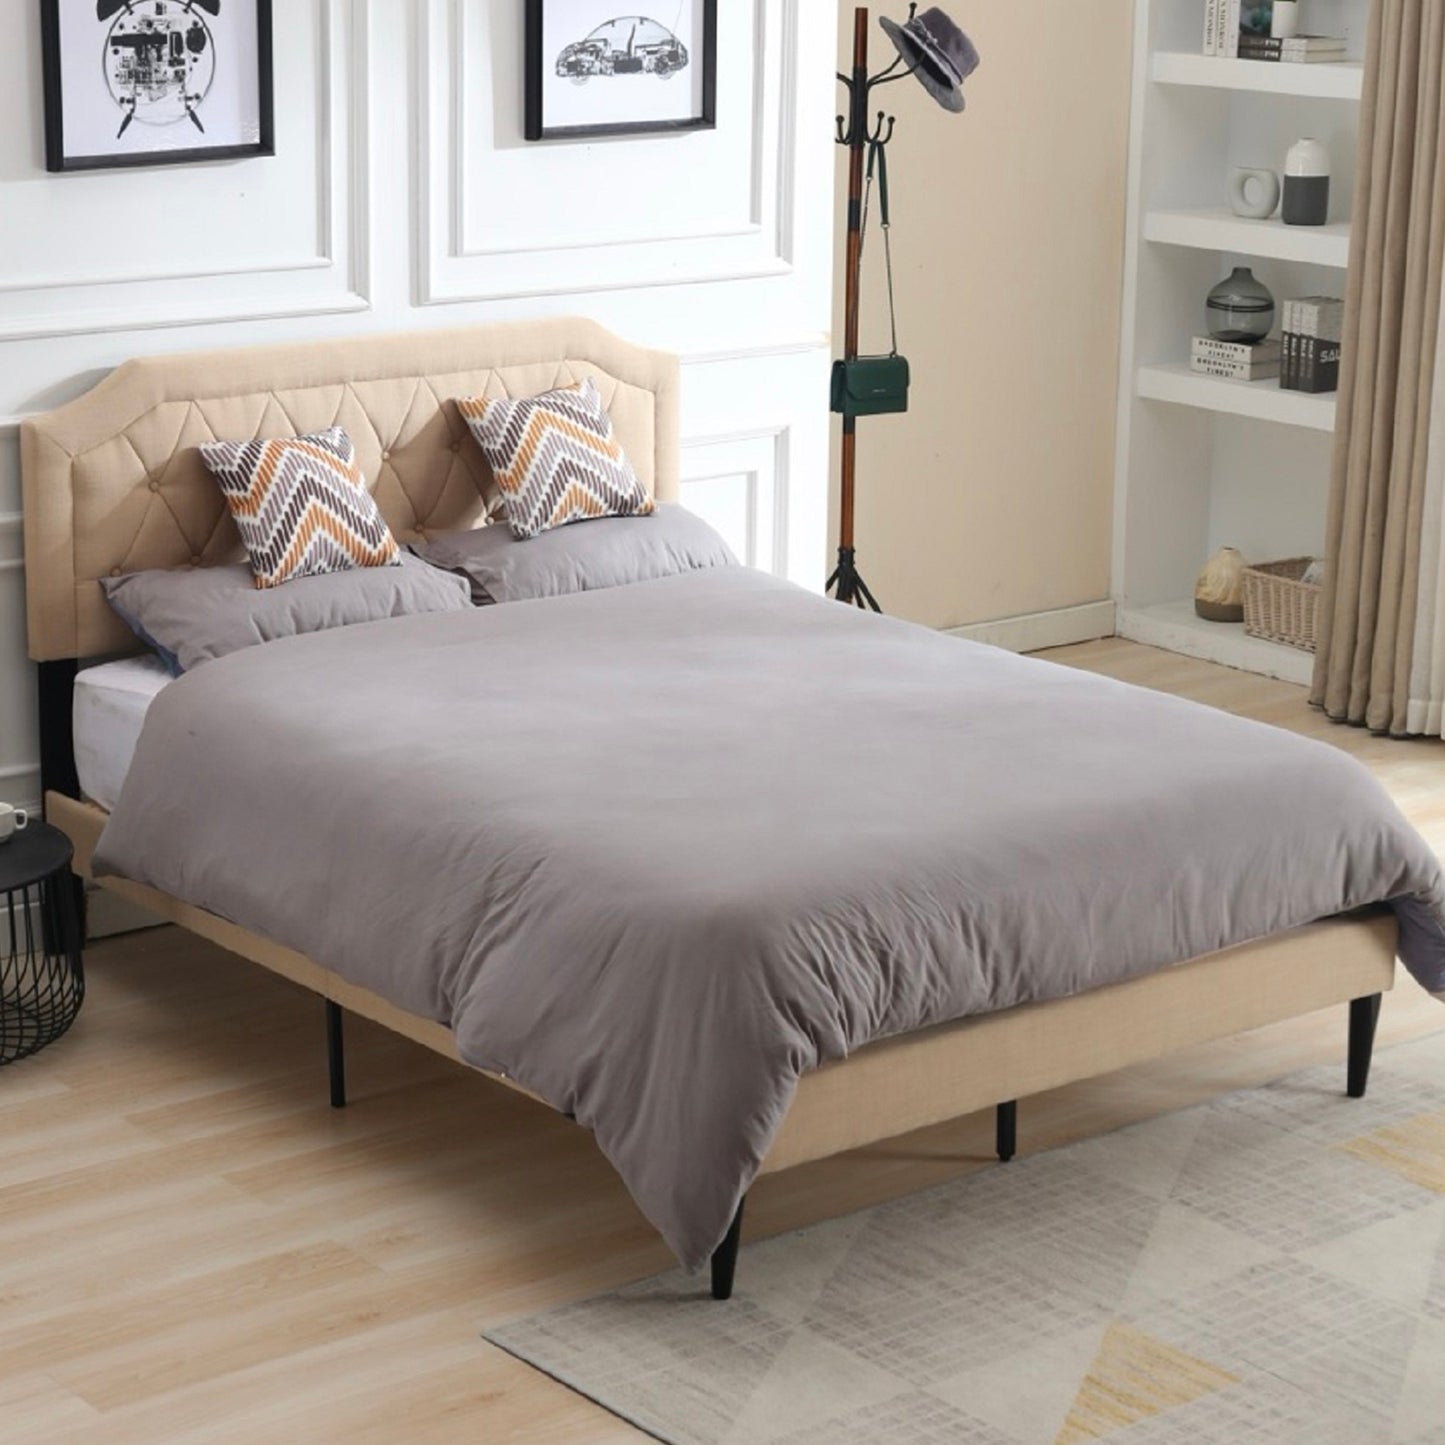 SYNGAR Queen Size Platform Bed Frame with Linen Fabric Upholstered Headboard, Button Tufted, Sturdy Frame and Strong Wooden Slats, No Box Spring Needed, Beige